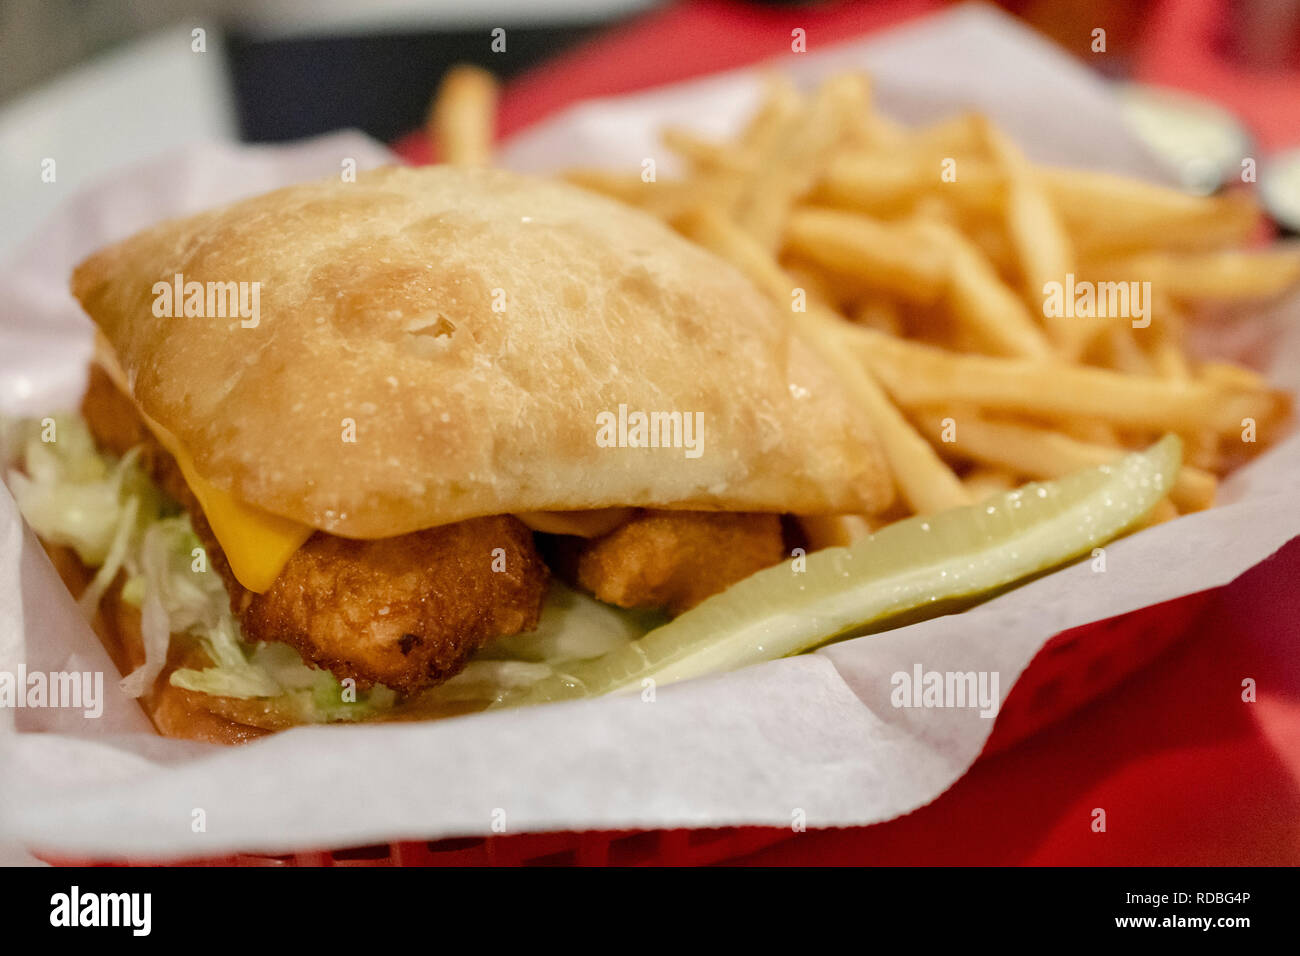 Deep fried fish sandwich on sour dough bun with cheese and lettuce.  Sandwich and fries in red basket with white paper liner.  Pickle included. Stock Photo